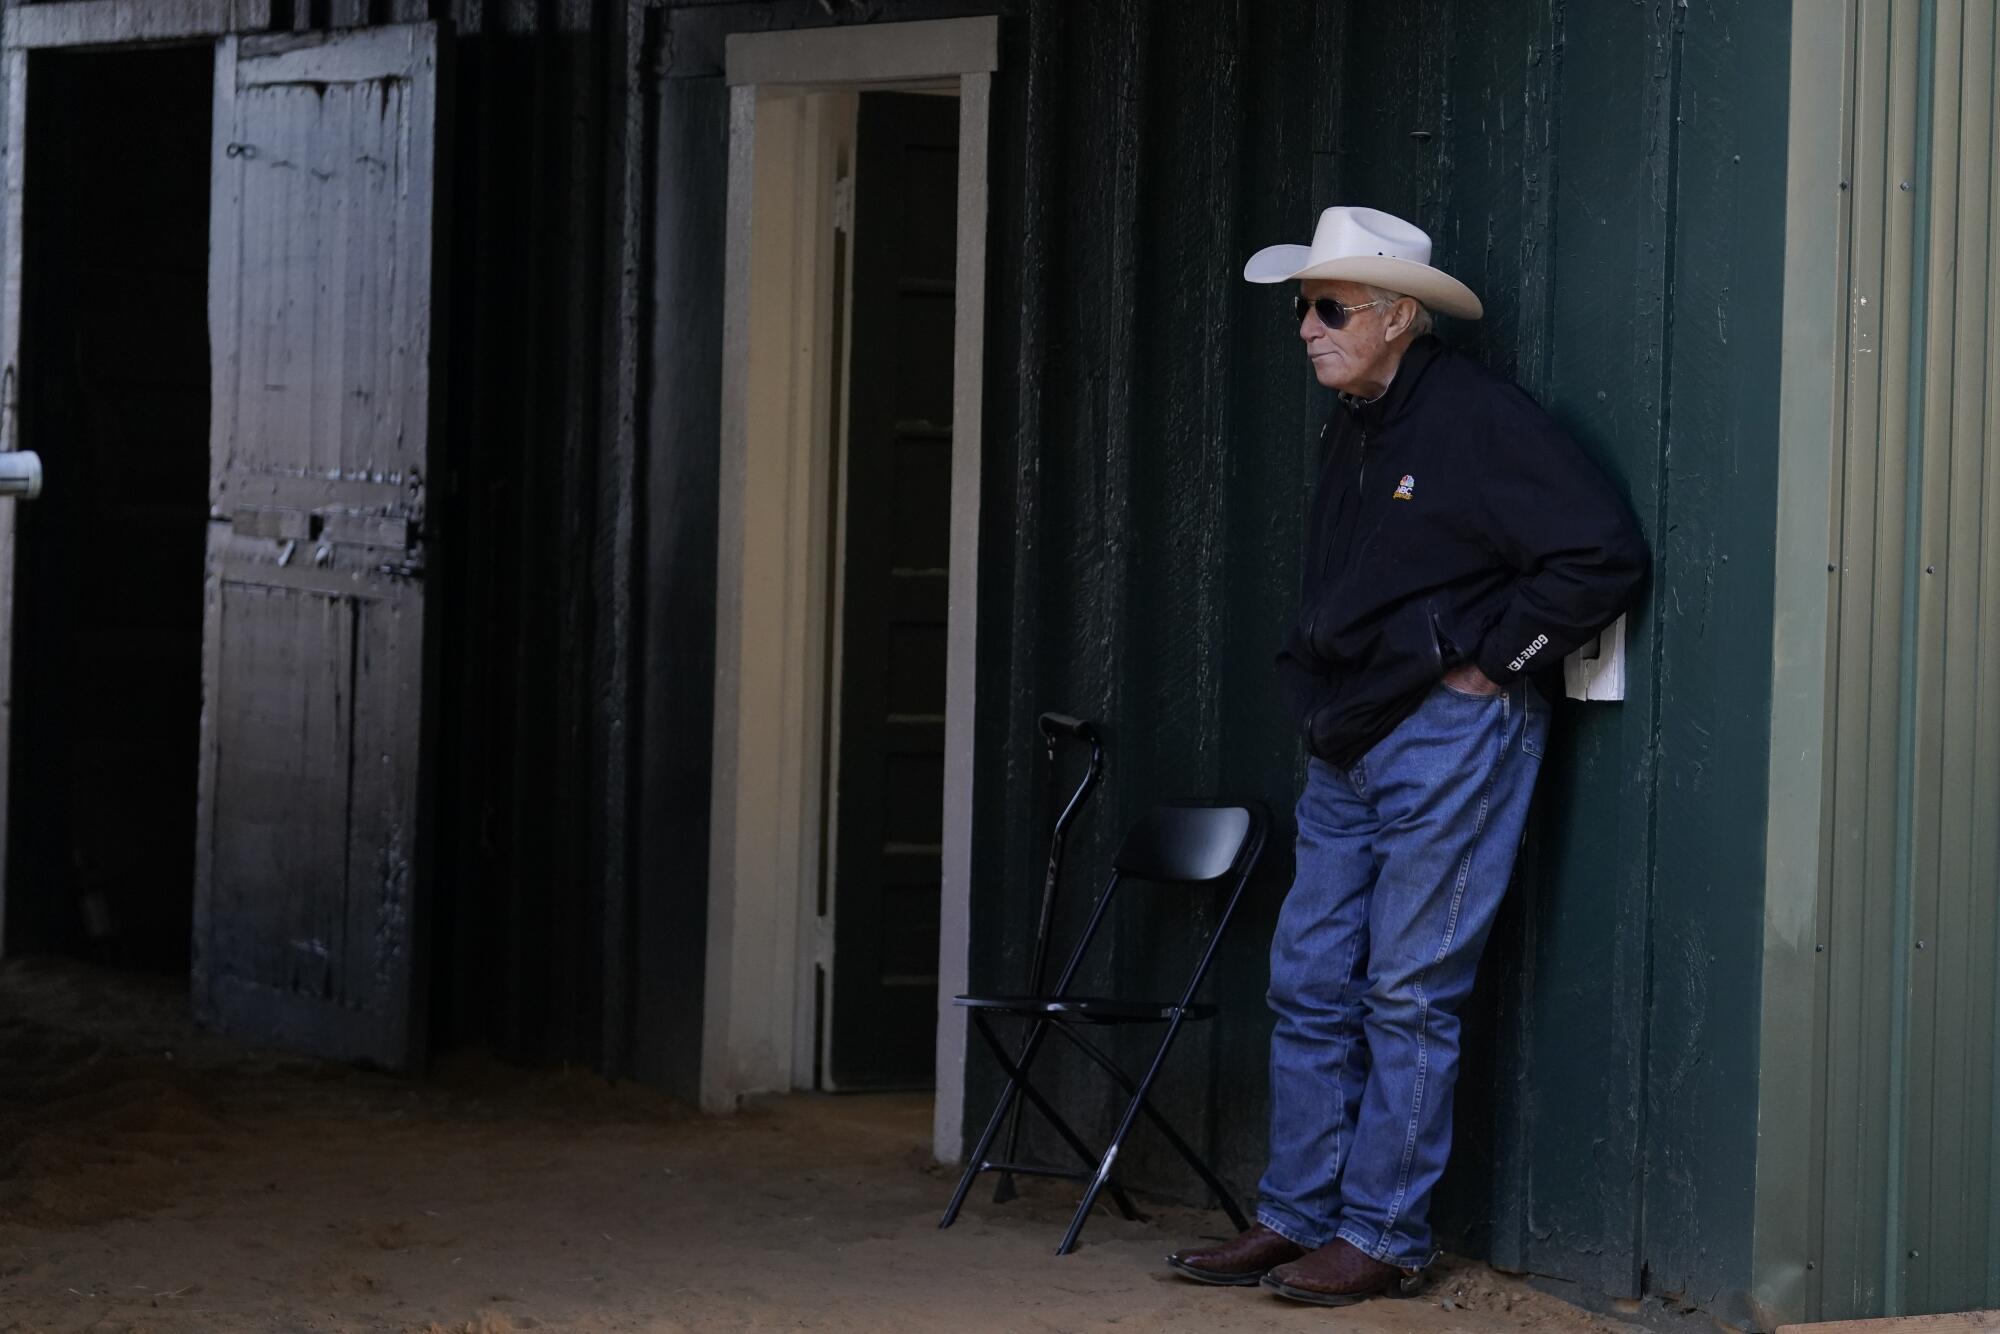 Wayne Lukas stands next to his favorite folding chair at the Stakes Barn at Pimlico Race Course.